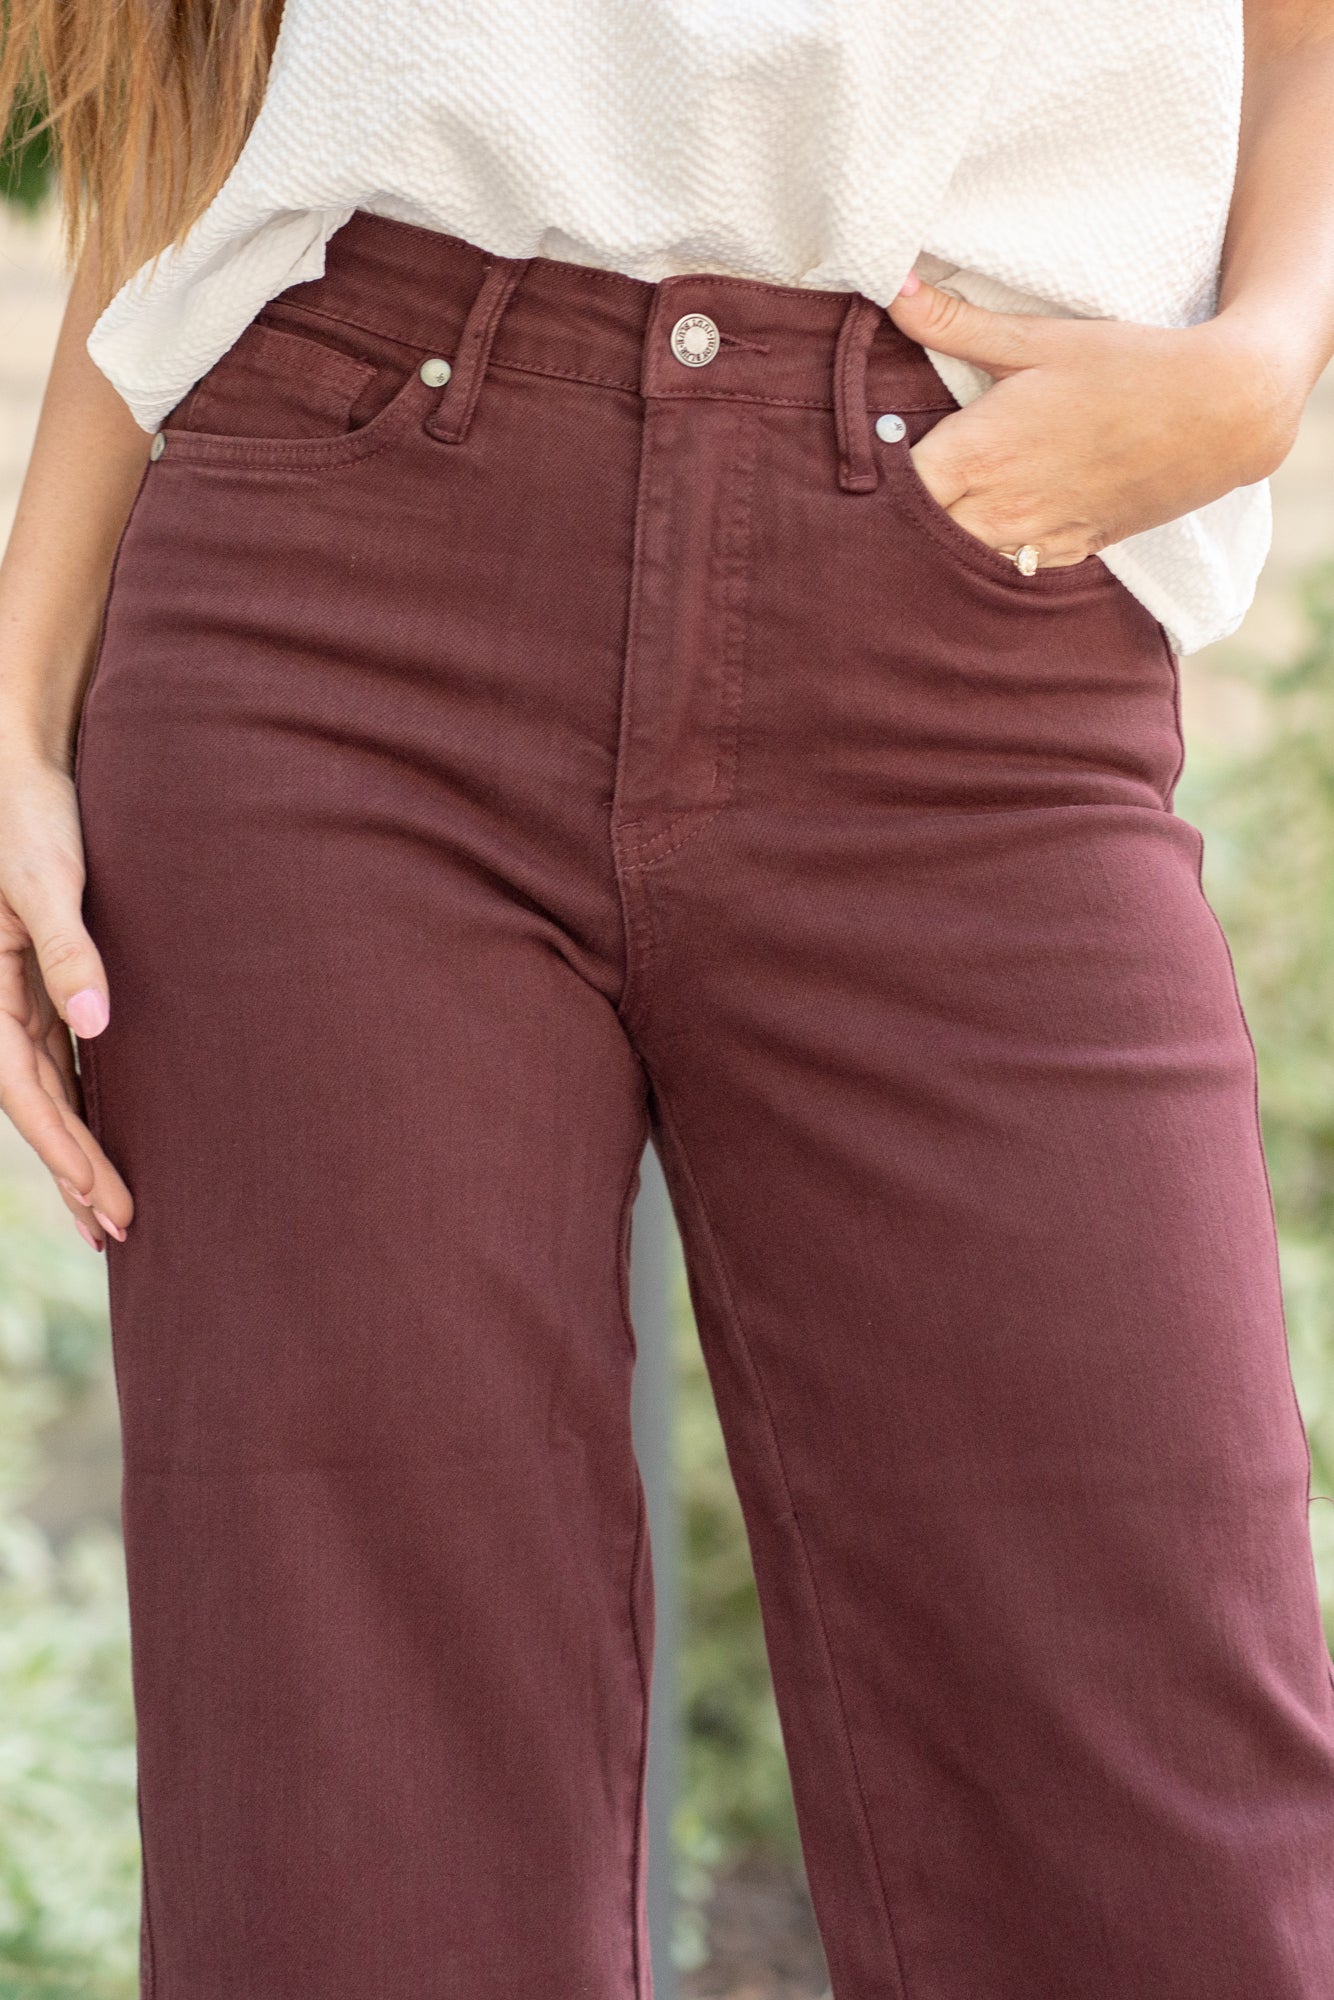 Judy Blue Jeans  Plus Size Oxblood Tummy Control Top High Rise